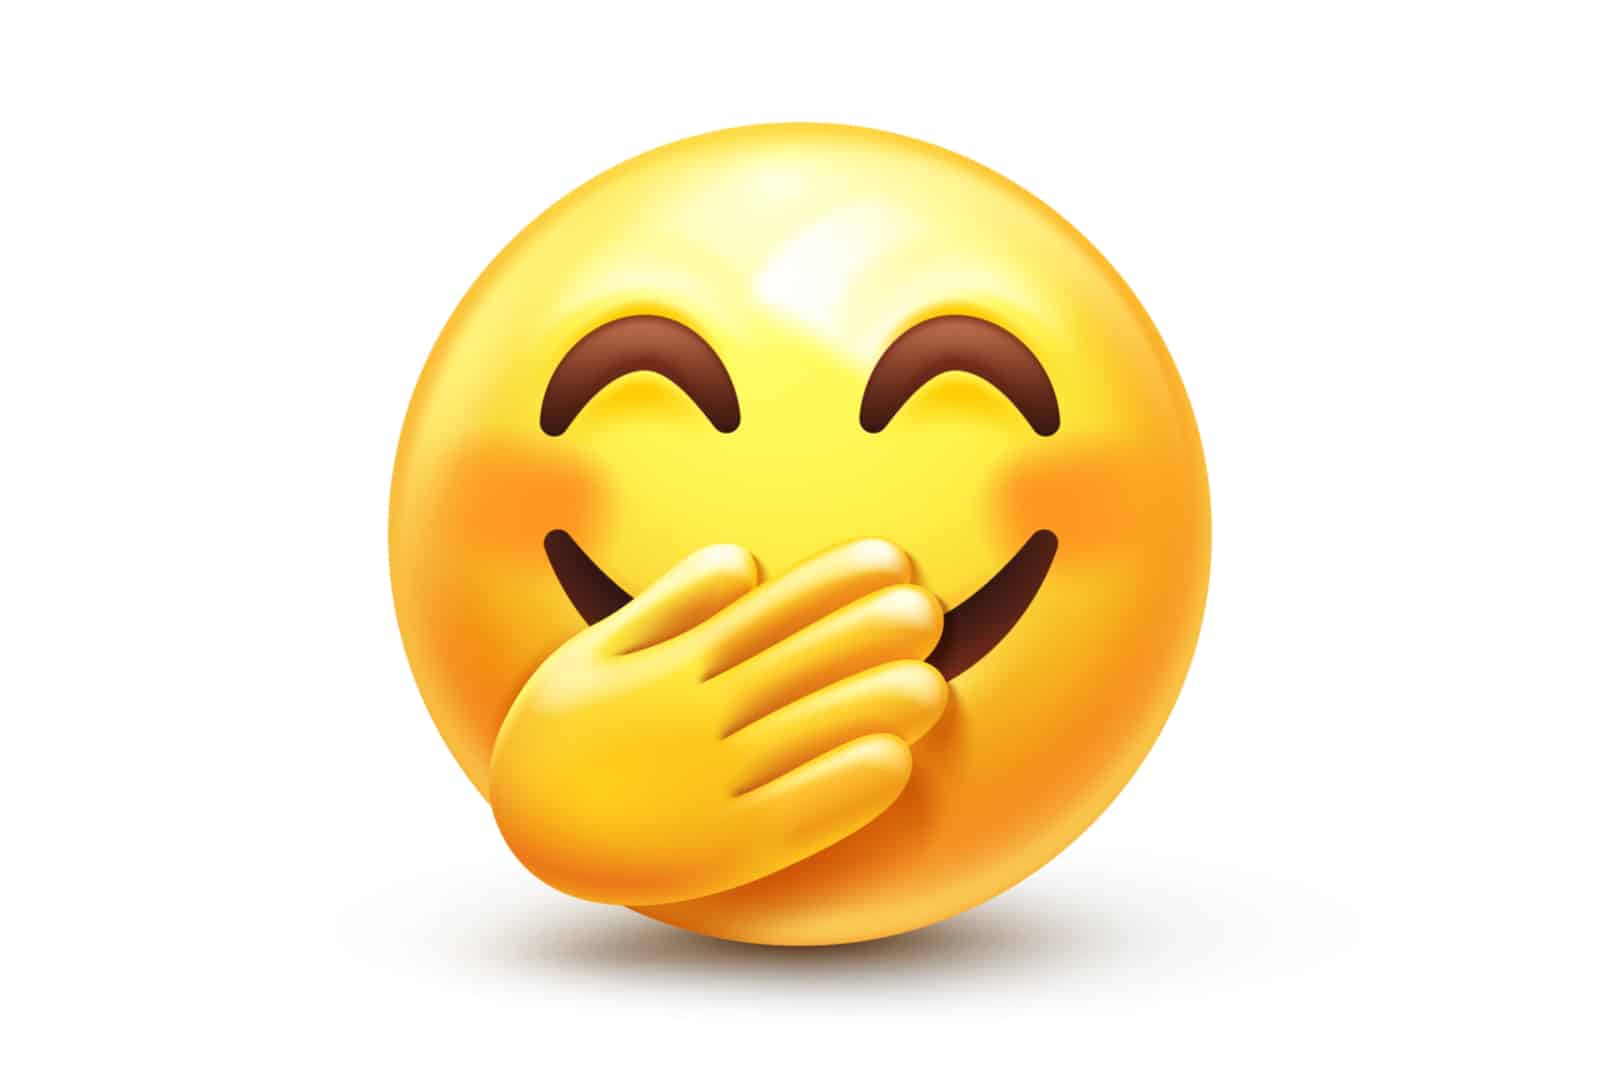 the face with hand over mouth emoji meaning from a guy